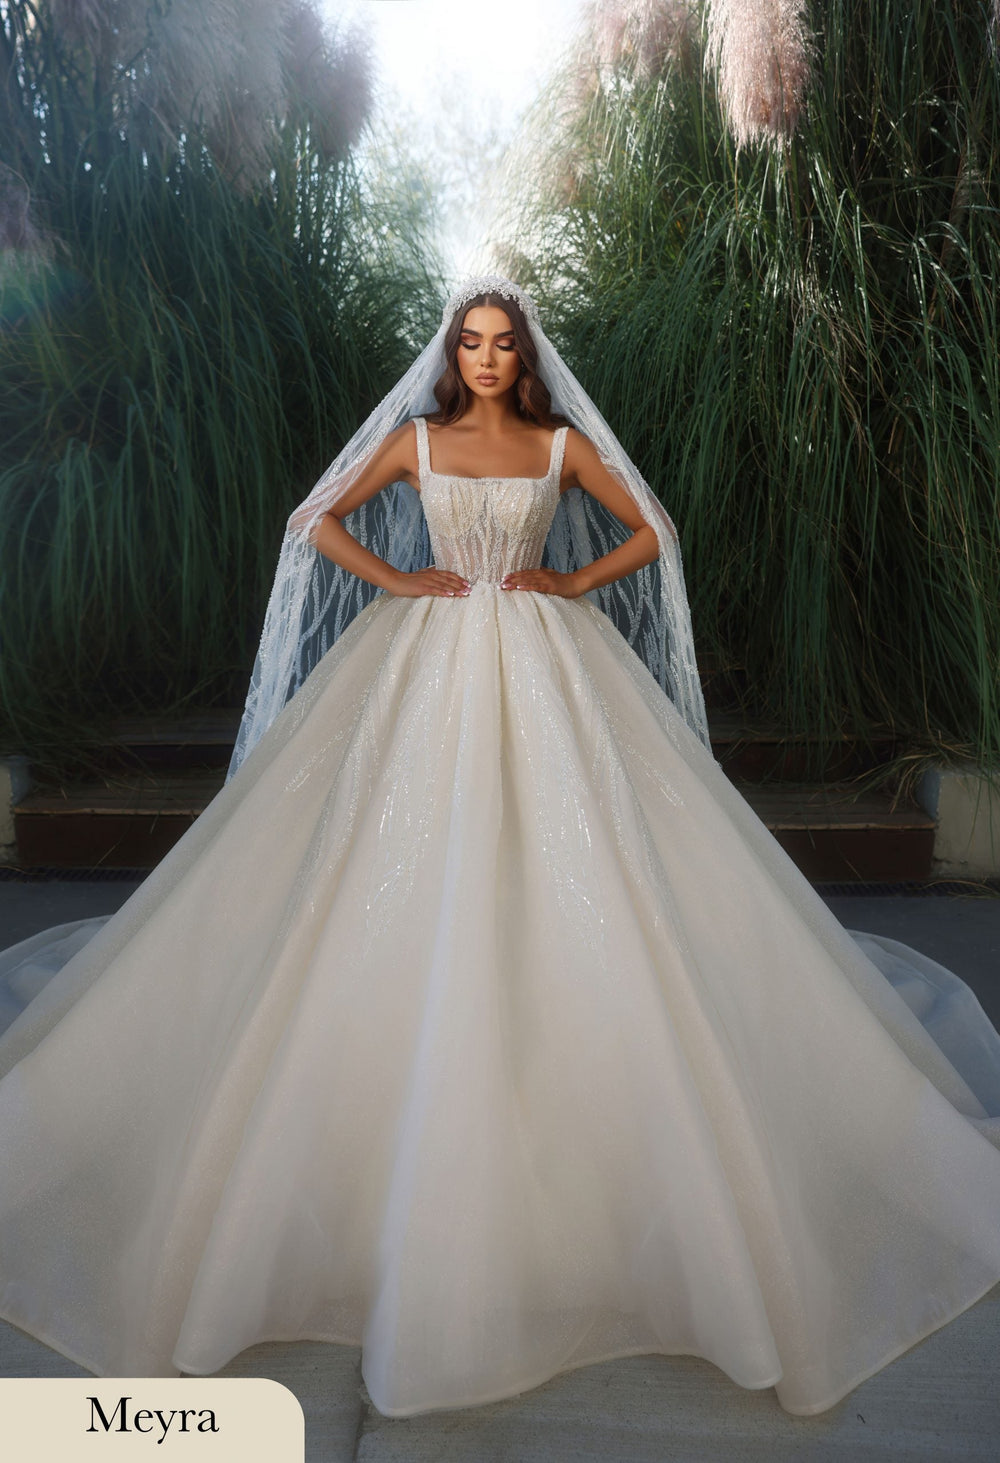 NoraCoutureNY bridal gown Meyra Bridal Gown